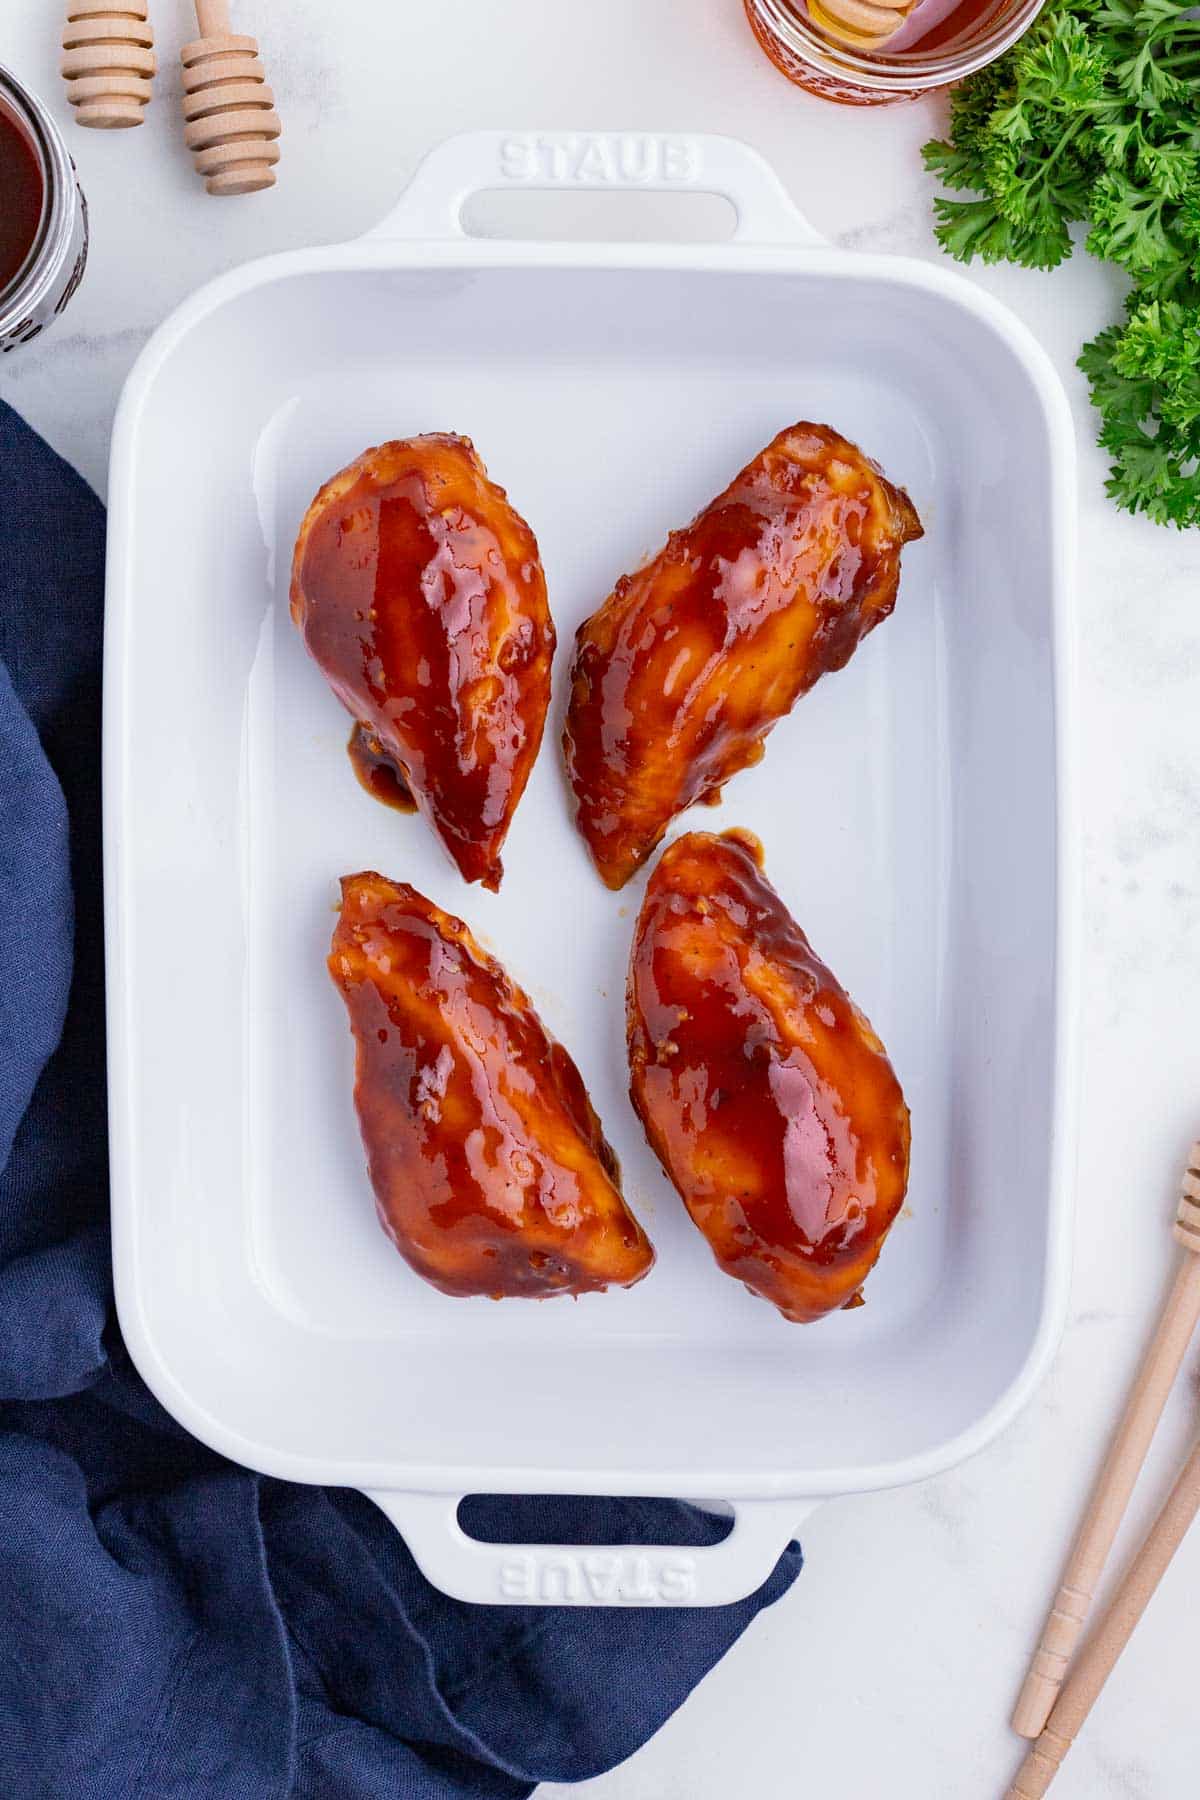 BBQ chicken is baked in the oven in a casserole dish.